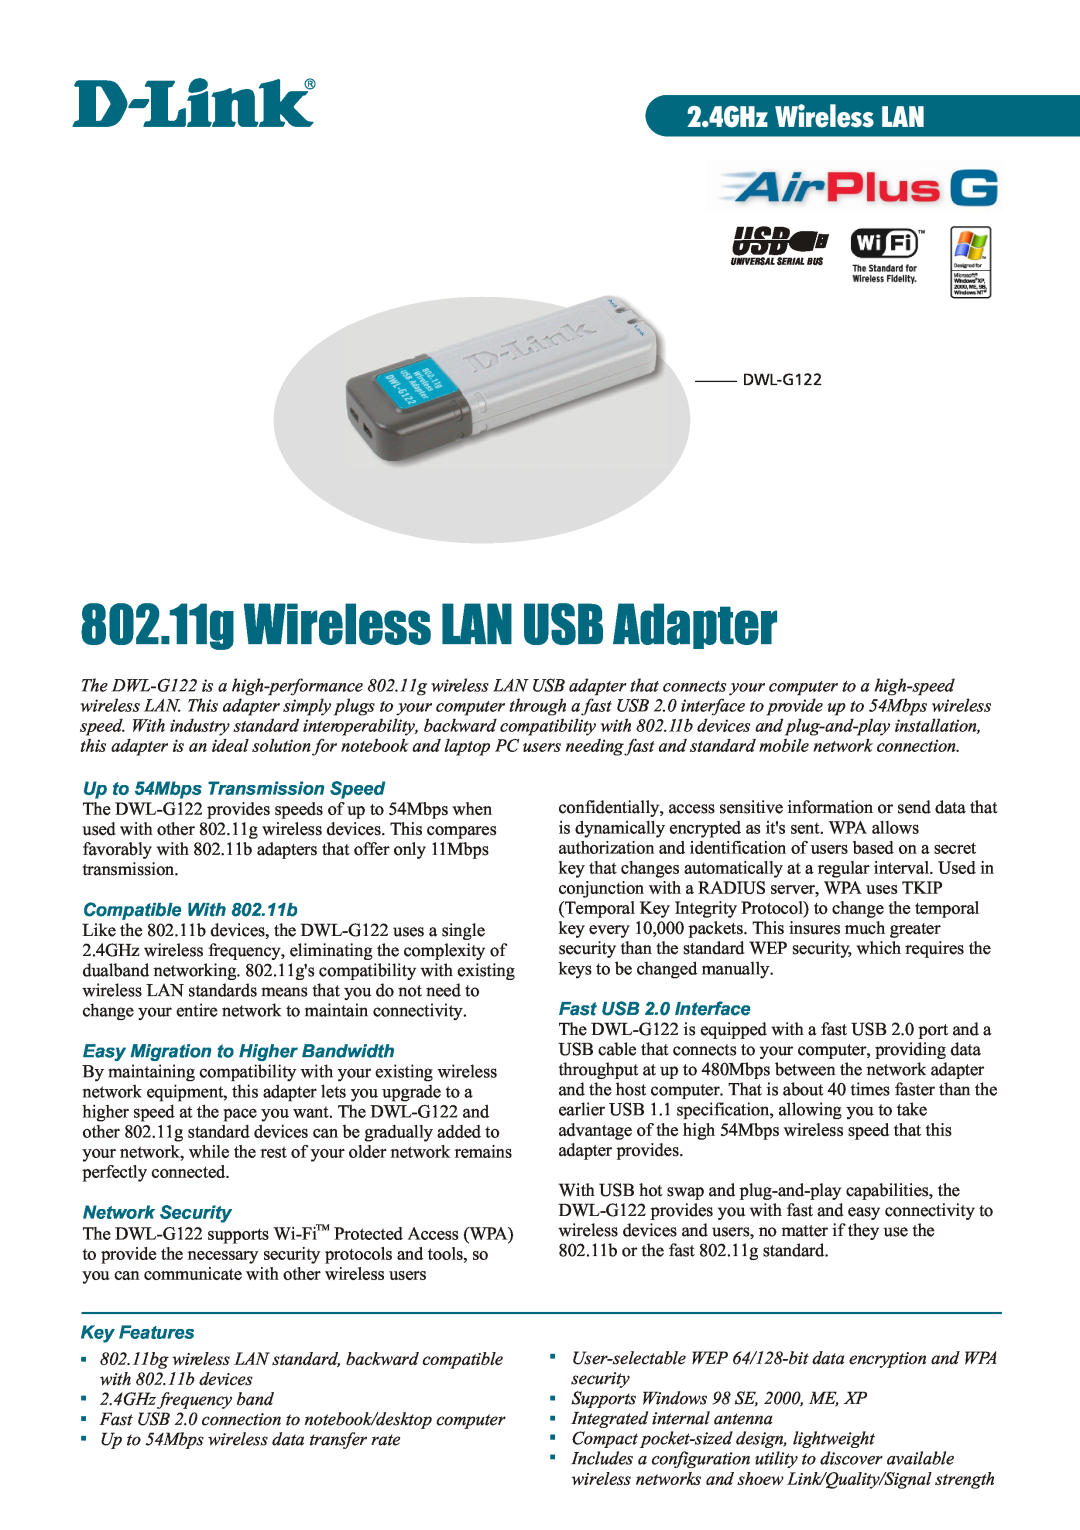 D-Link DWL-G122 manual 2.4GHz Wireless LAN, Up to 54Mbps Transmission Speed, Compatible With 802.11b, Network Security 